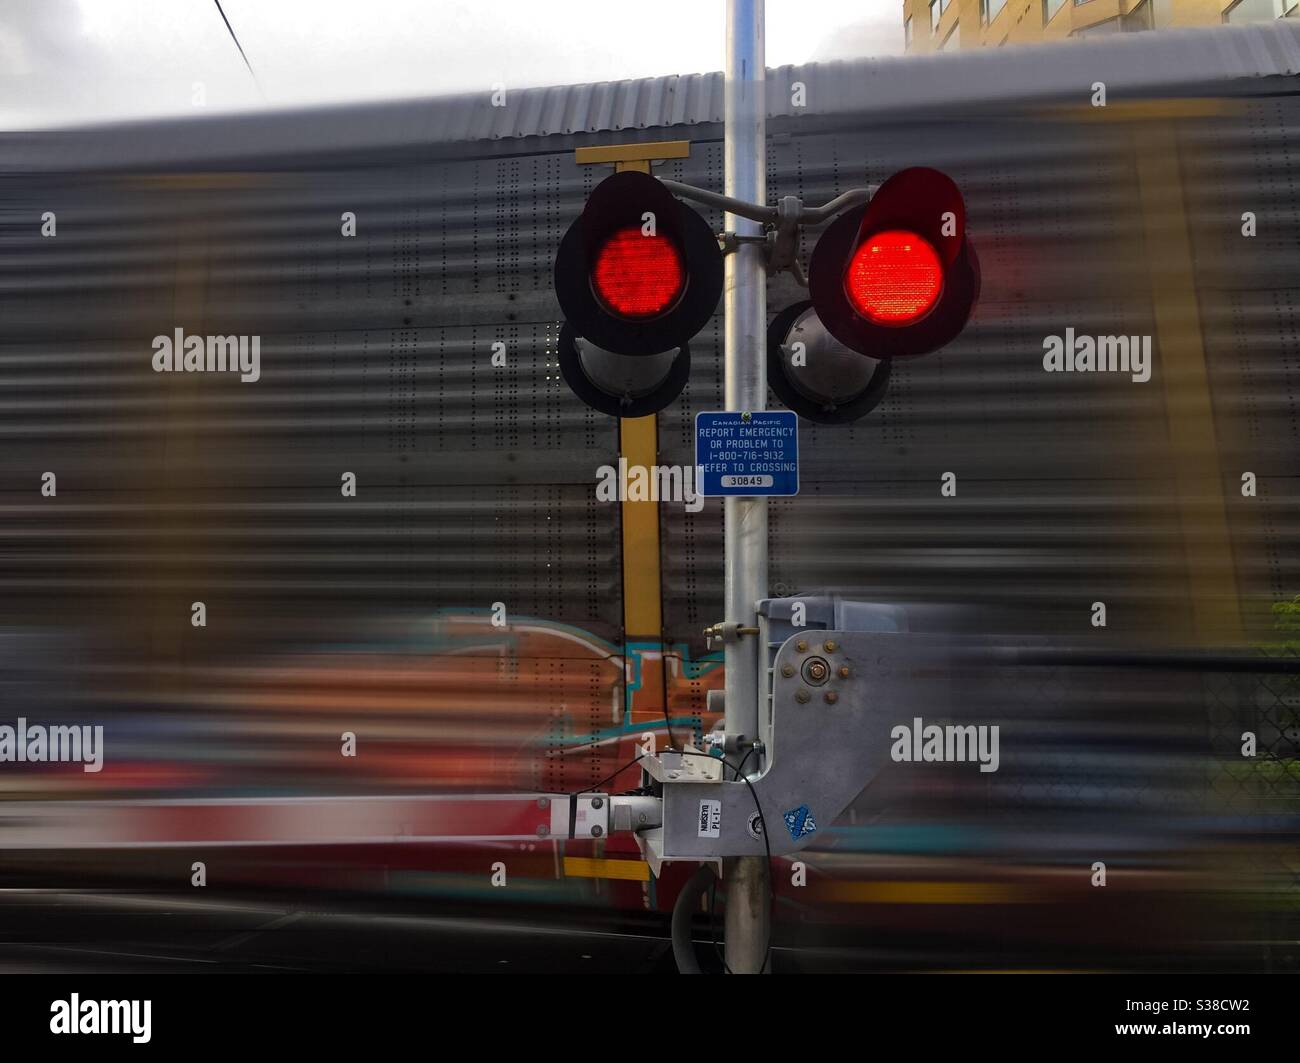 Moving train at a railway crossing with flashing red lights on a cloudy day, Ontario, Canada. Stock Photo